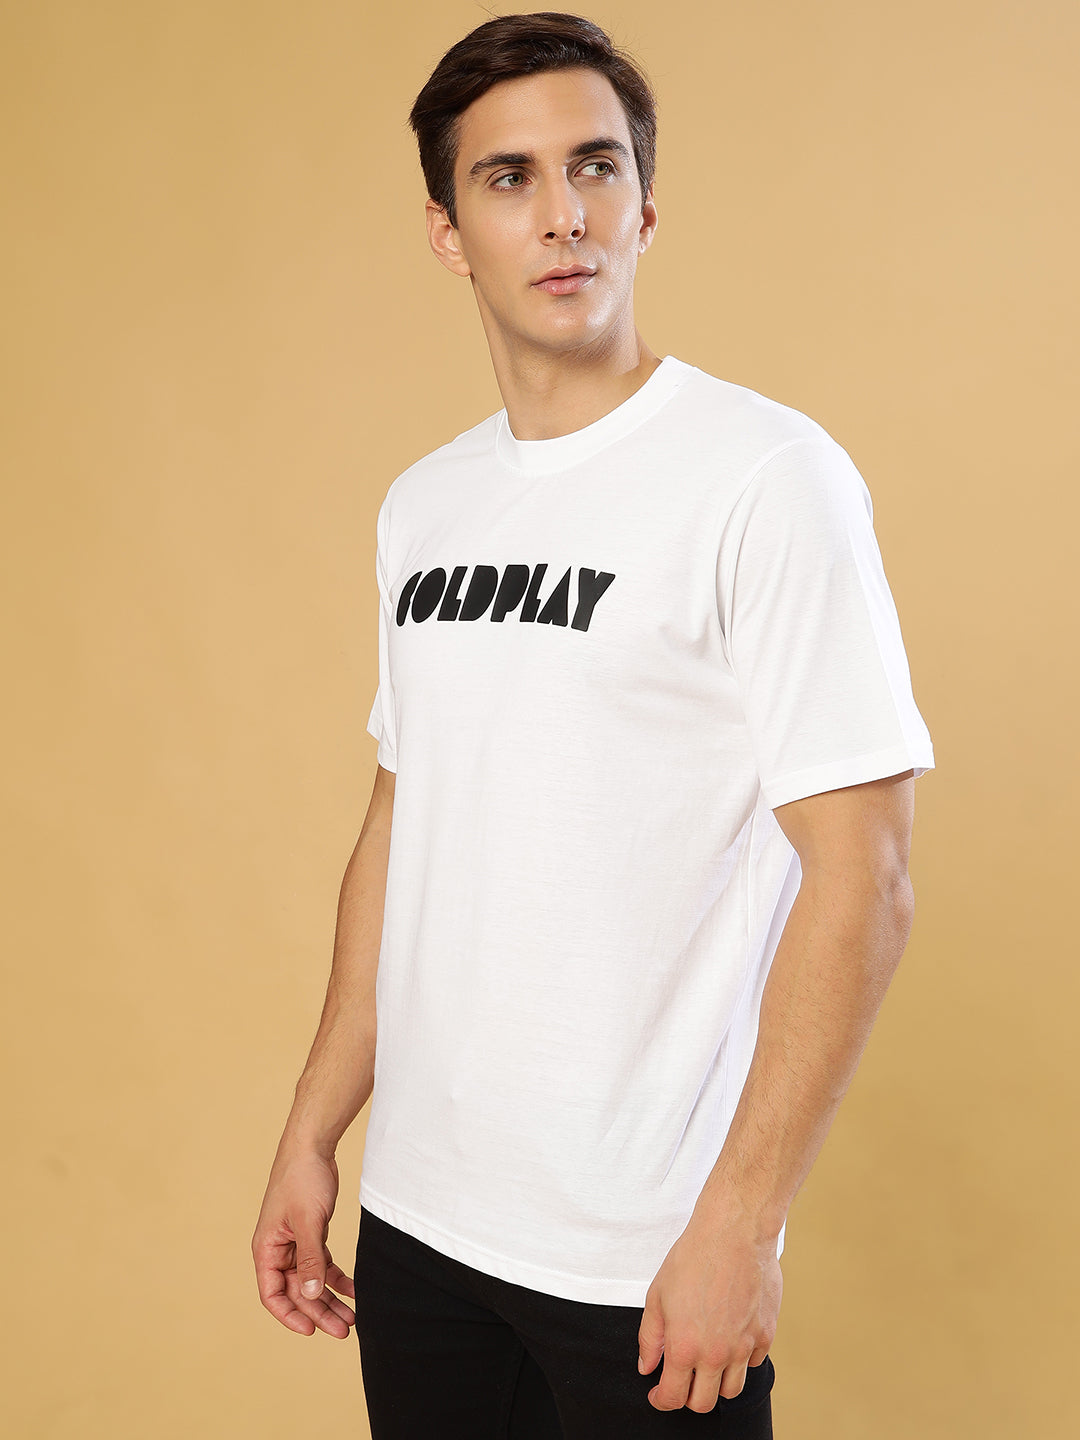 Cold Play White Regular T-Shirts